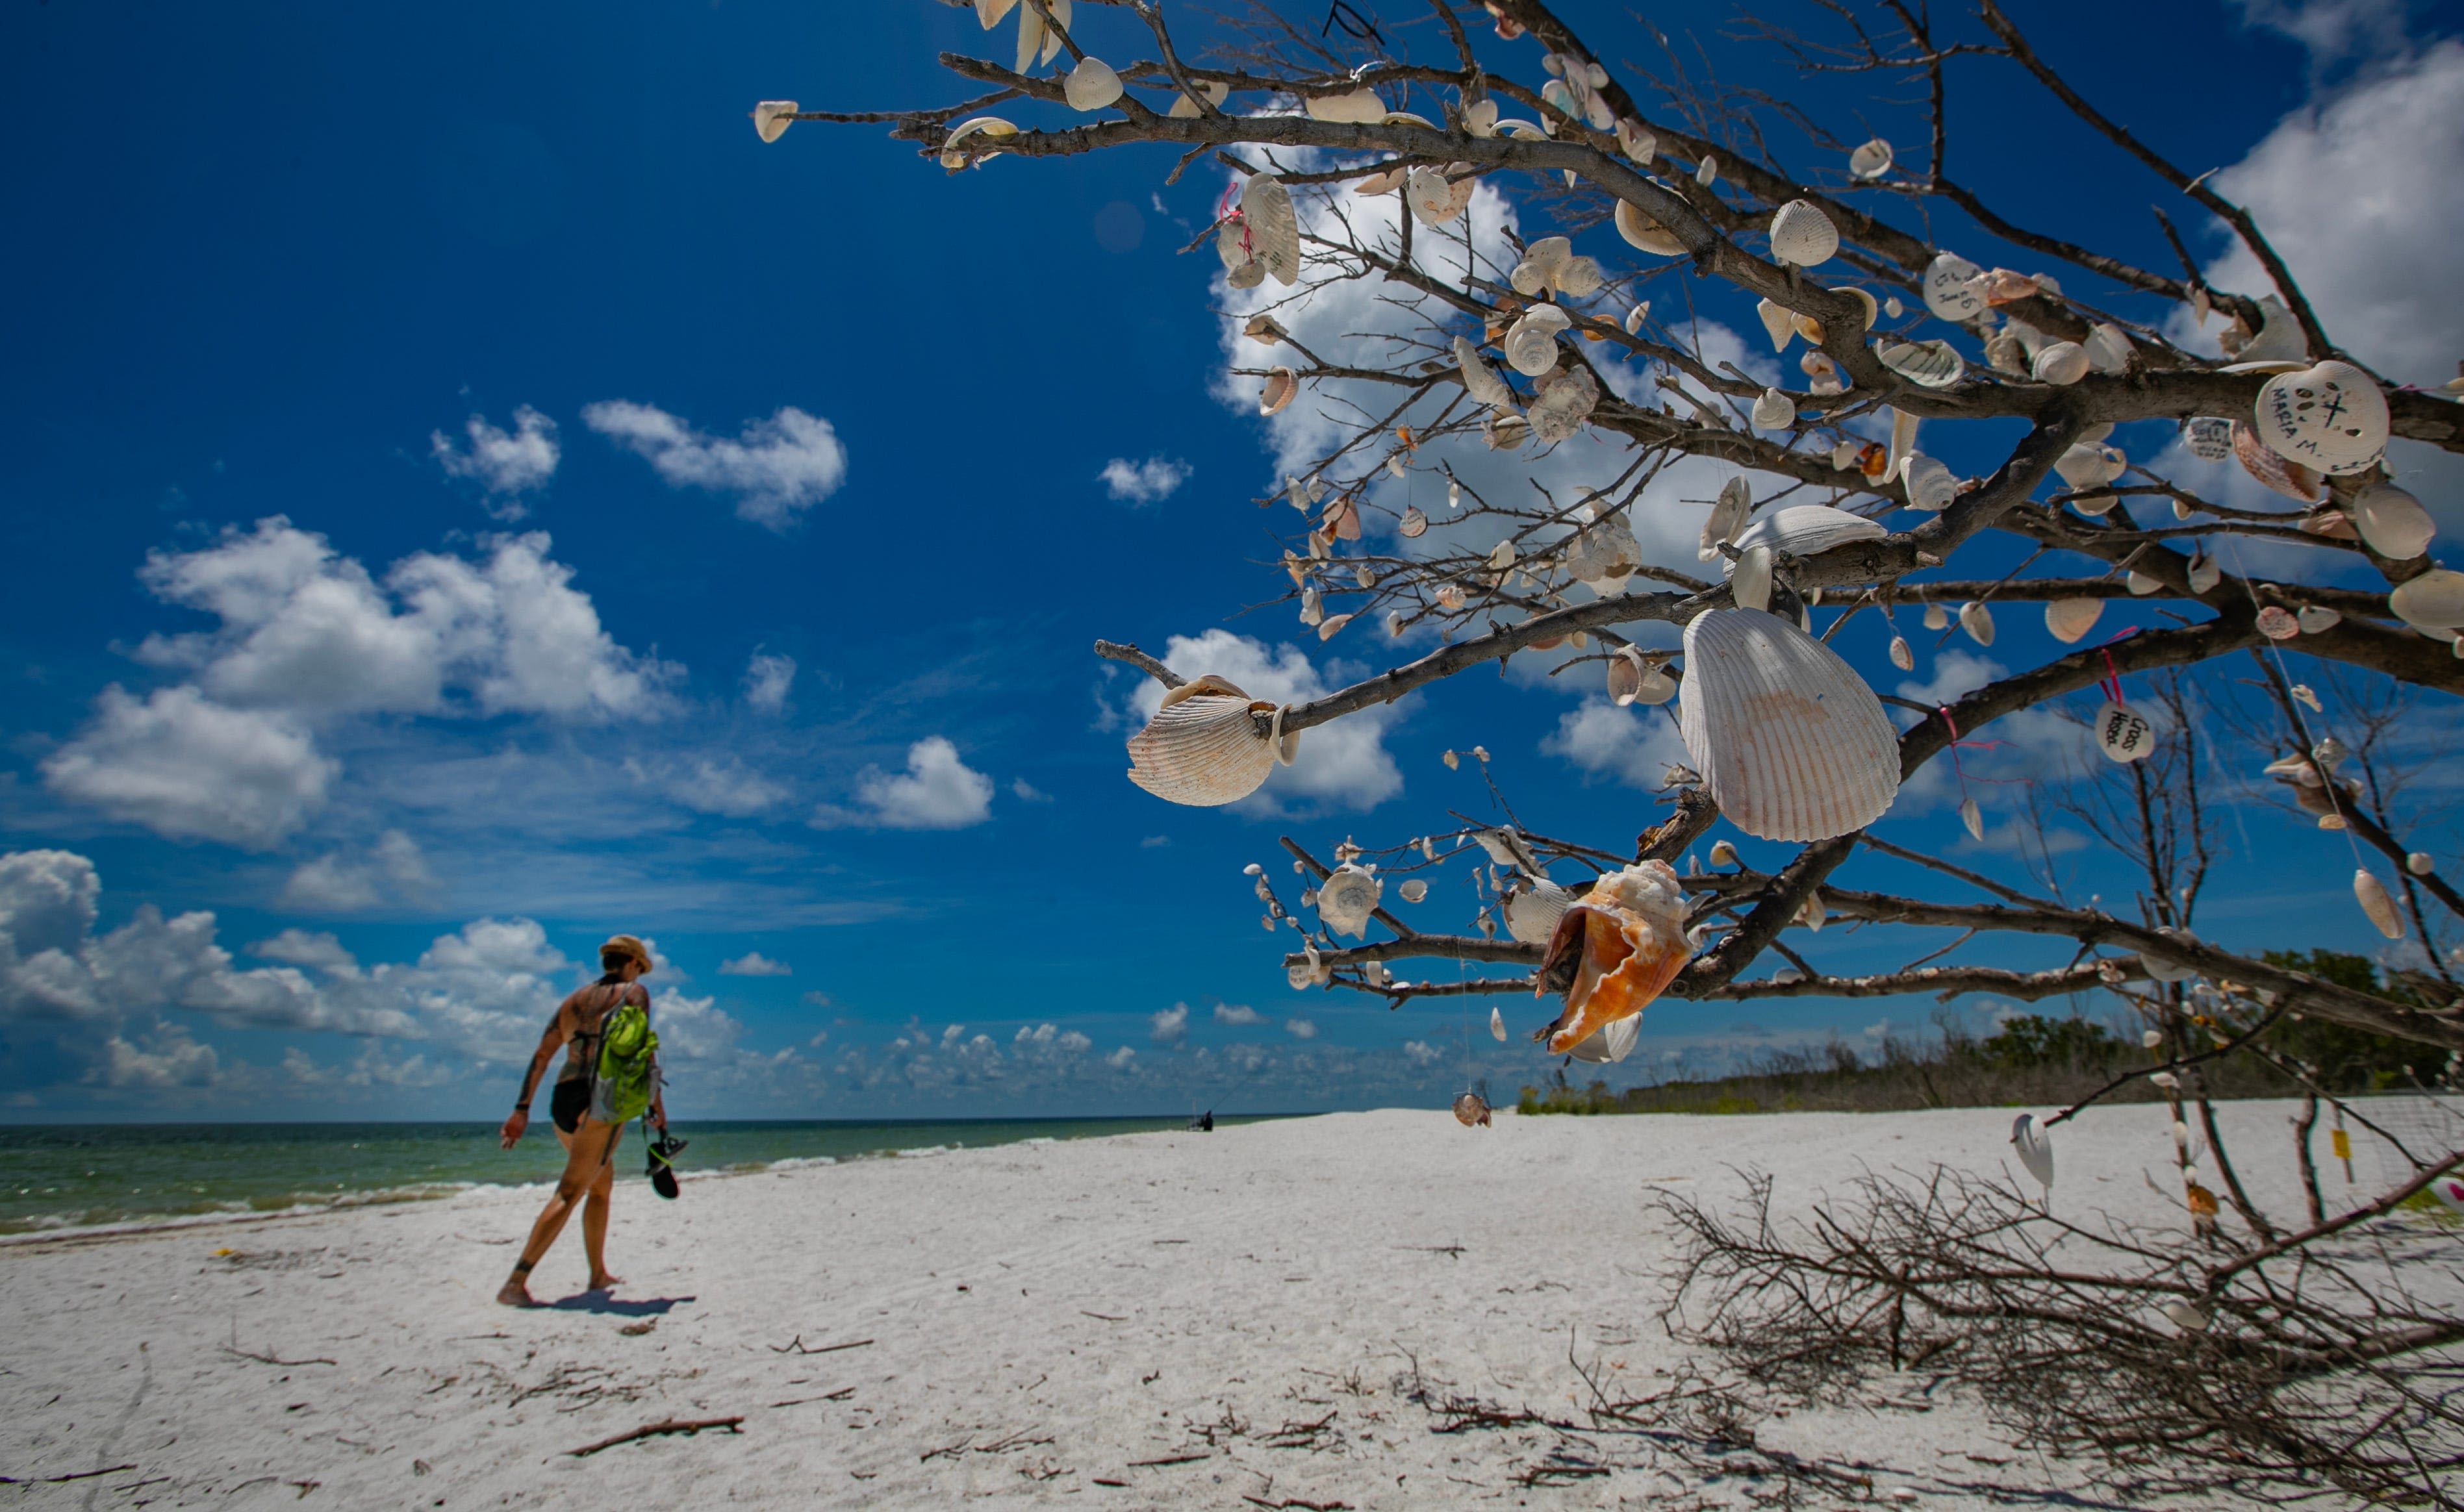 Collier County has some of the most beautiful beaches in the world. Here's a guide for summer